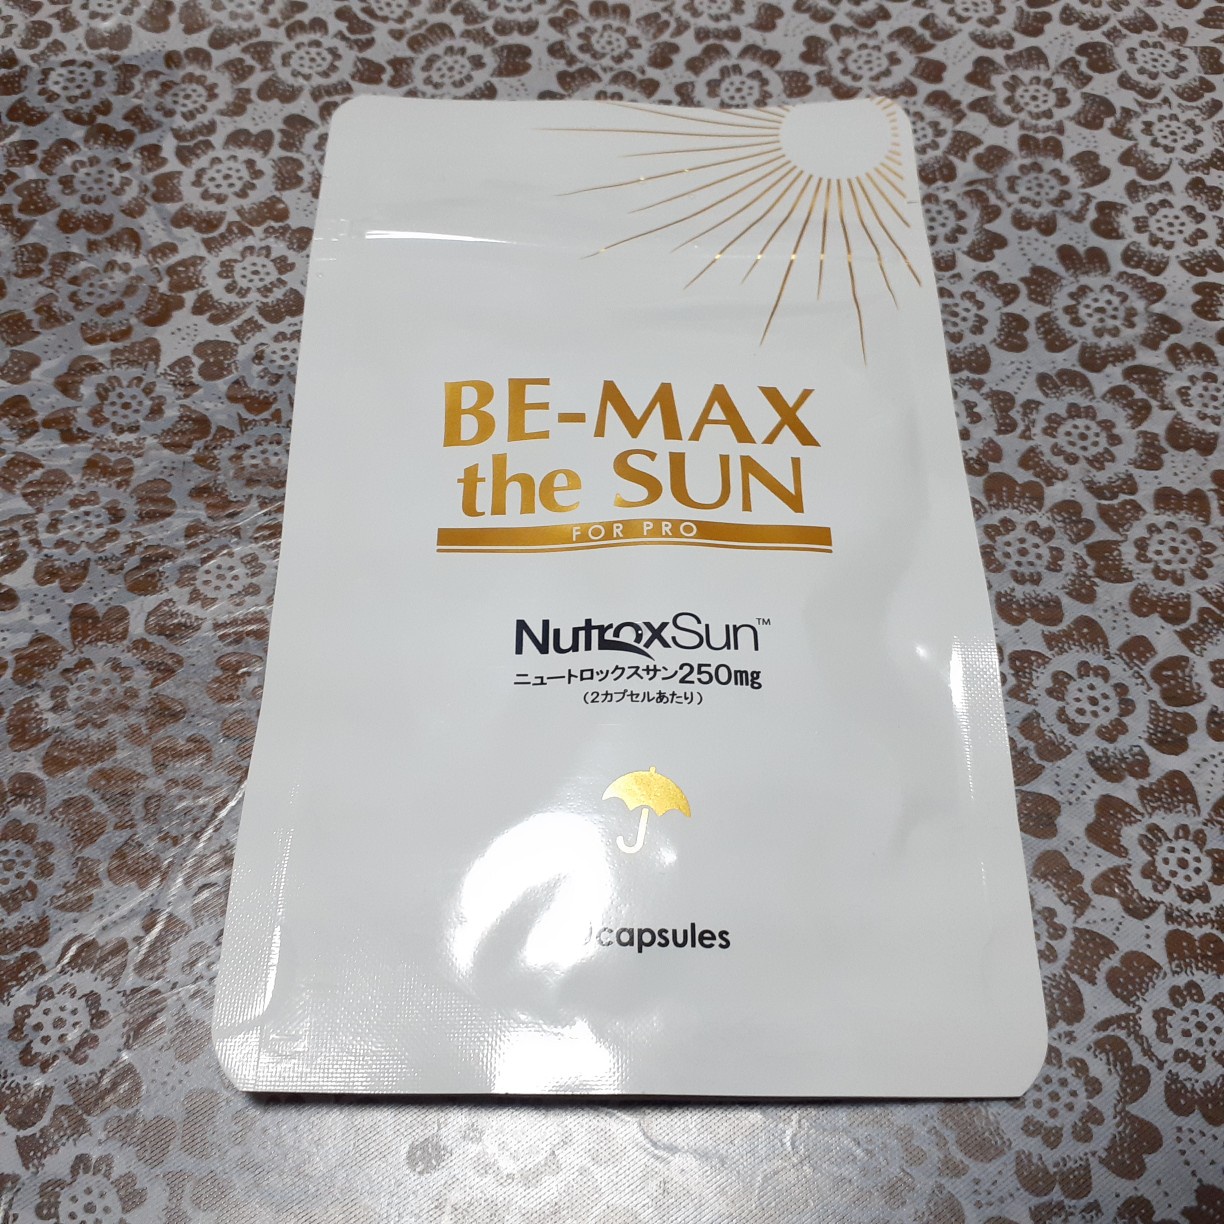 BE-MAX / BE-MAX the SUNの公式商品情報｜美容・化粧品情報はアットコスメ